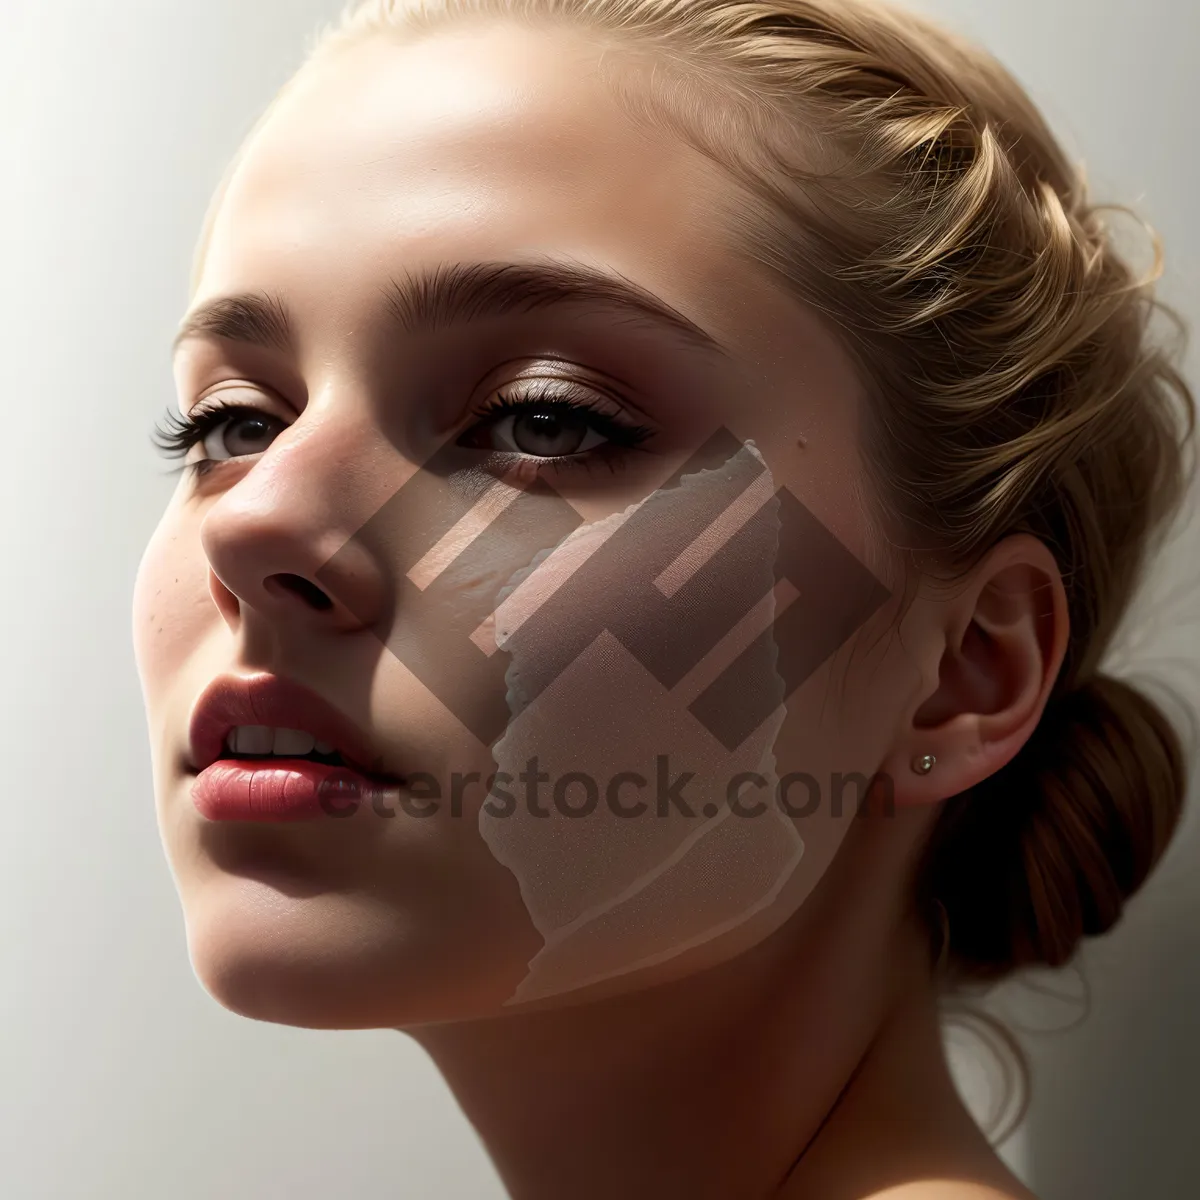 Picture of Radiant Beauty: Closeup Portrait of Attractive Model with Healthy Skin